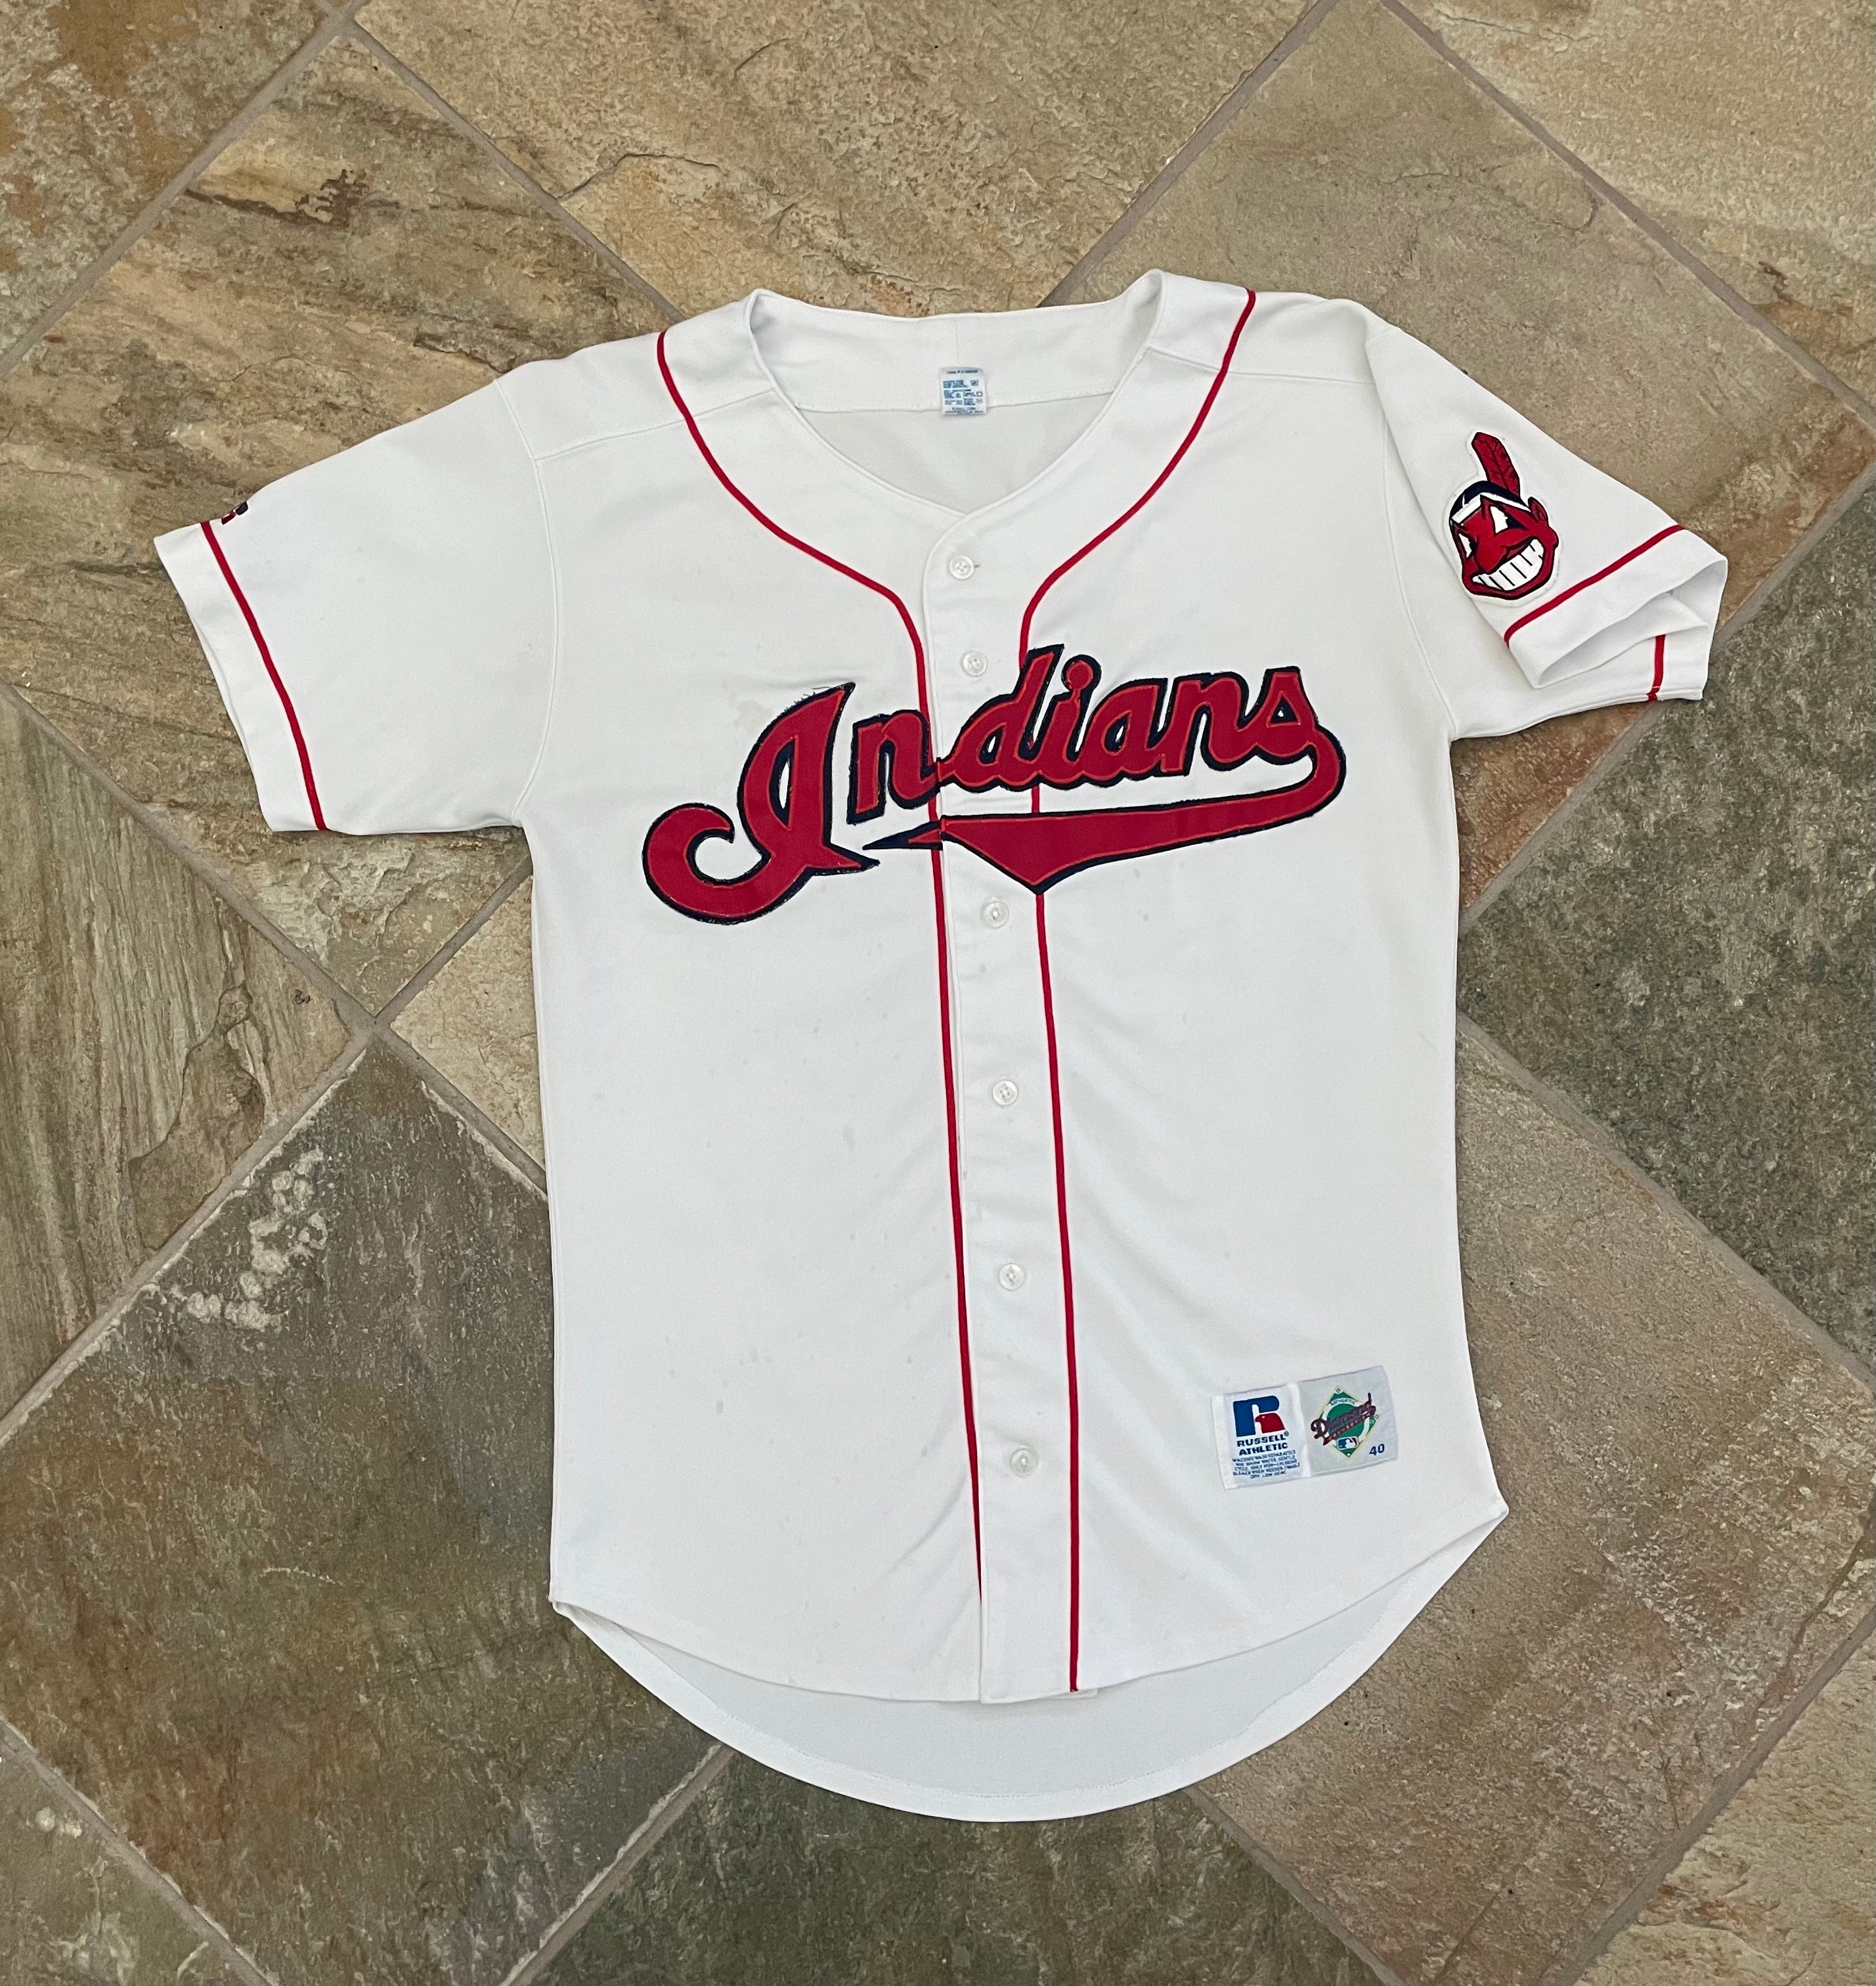 1998 CLEVELAND INDIANS AUTHENTIC RUSSELL ATHLETIC JERSEY (AWAY) XL